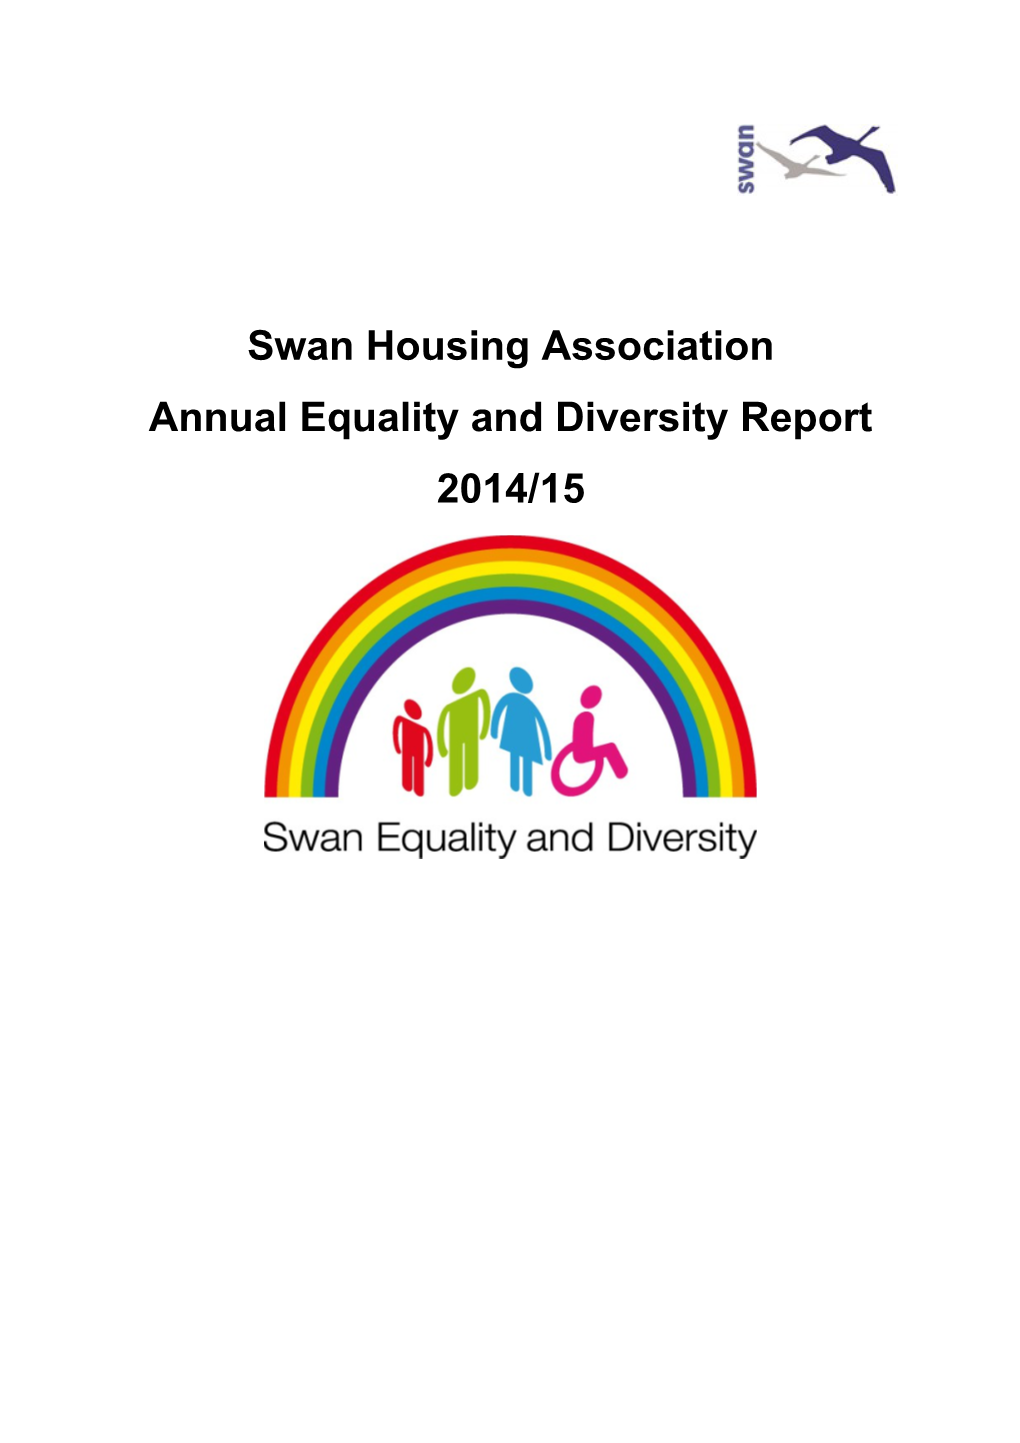 Annual Equality and Diversity Report